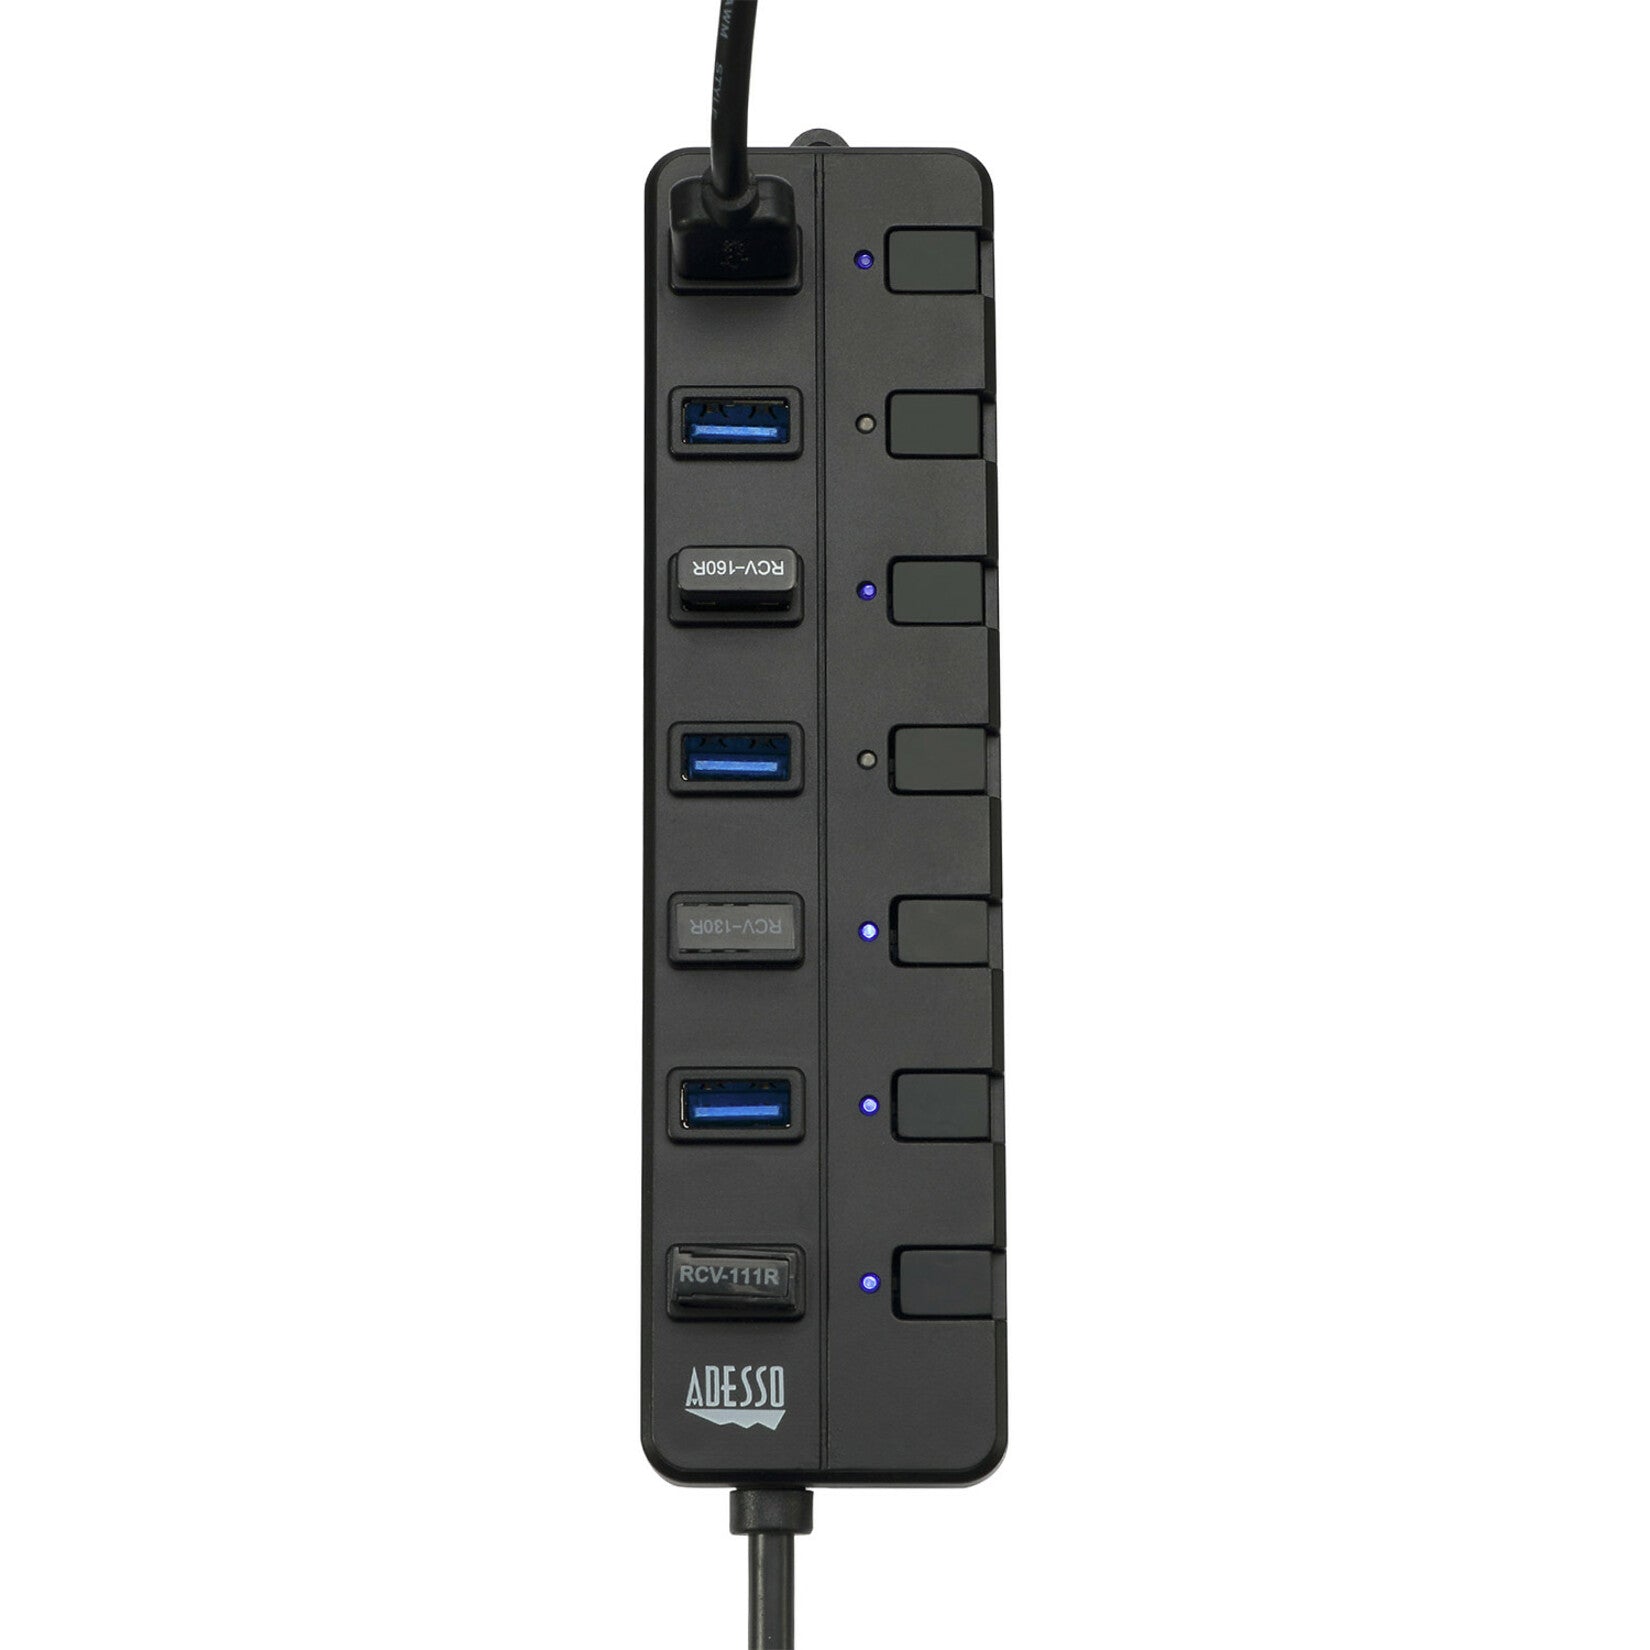 Adesso AUH-3070P 7-ports USB 3.0 Hub with 5V2A Power Adaptor, Mac/PC Compatible